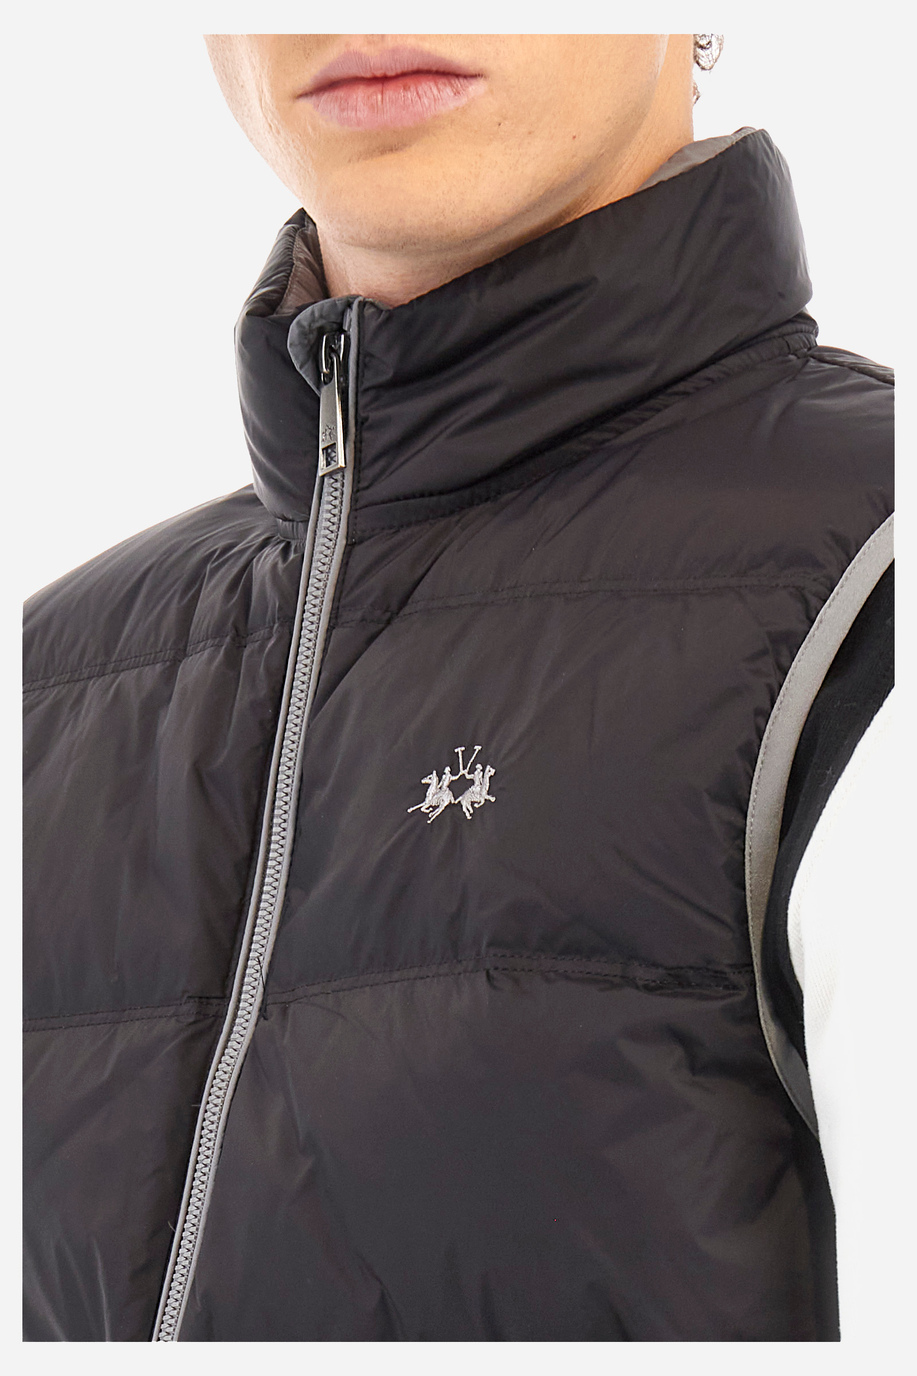 Man gilet in regular fit - Winniefred - Our favourites for him | La Martina - Official Online Shop